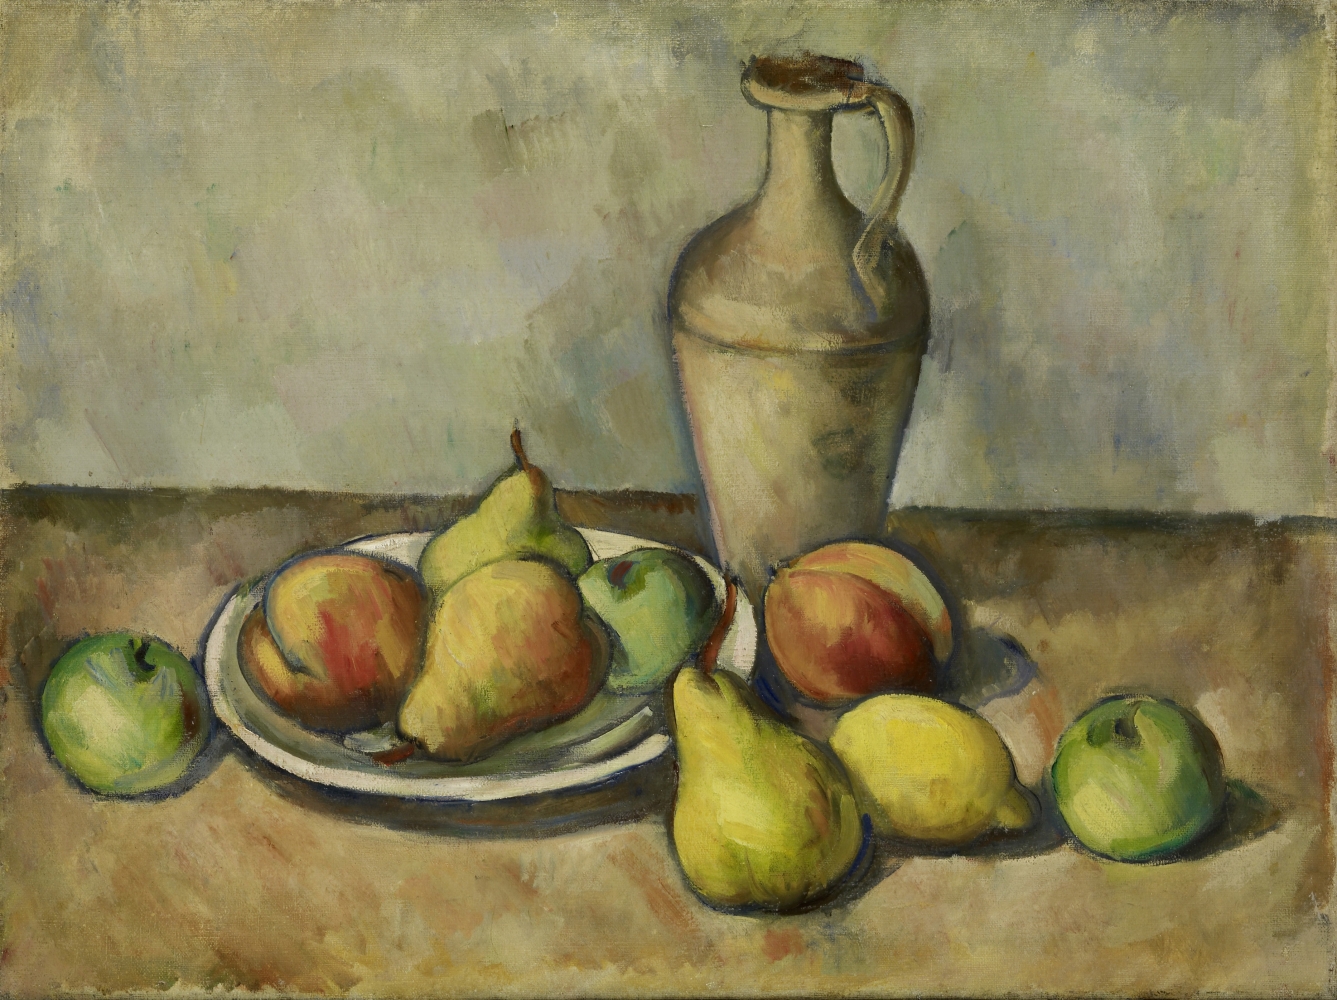 Pears, Peaches, Pitcher, c. 1926&ndash;27, oil on canvas, 17 3/8 x 23 3/8 in. (44.1 x 59.4 cm). Private collection. [AGCR: P015]